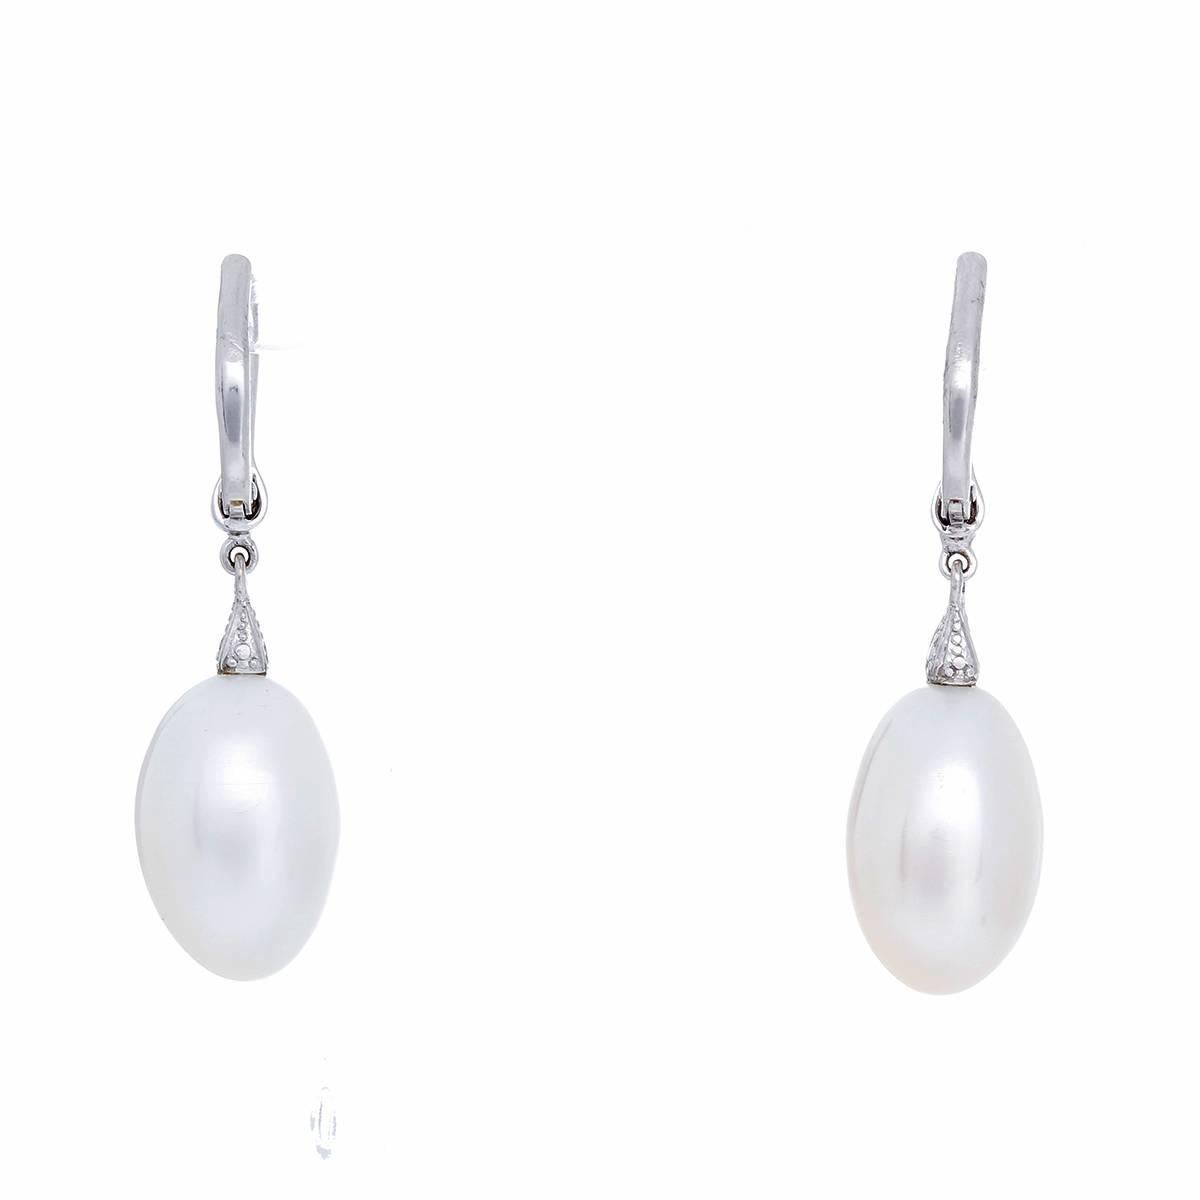 These Rhonda Faber Green earrings feature  0.47 ctw. of full-cut diamonds (Color: G-H-I, Clarity: VS) with a baroque freshwater cultured pearl set in 18k white gold. Pearls measure apx. 16.00 x 10.40mm and 16.00 x 10.85 mm. Earrings measure apx.